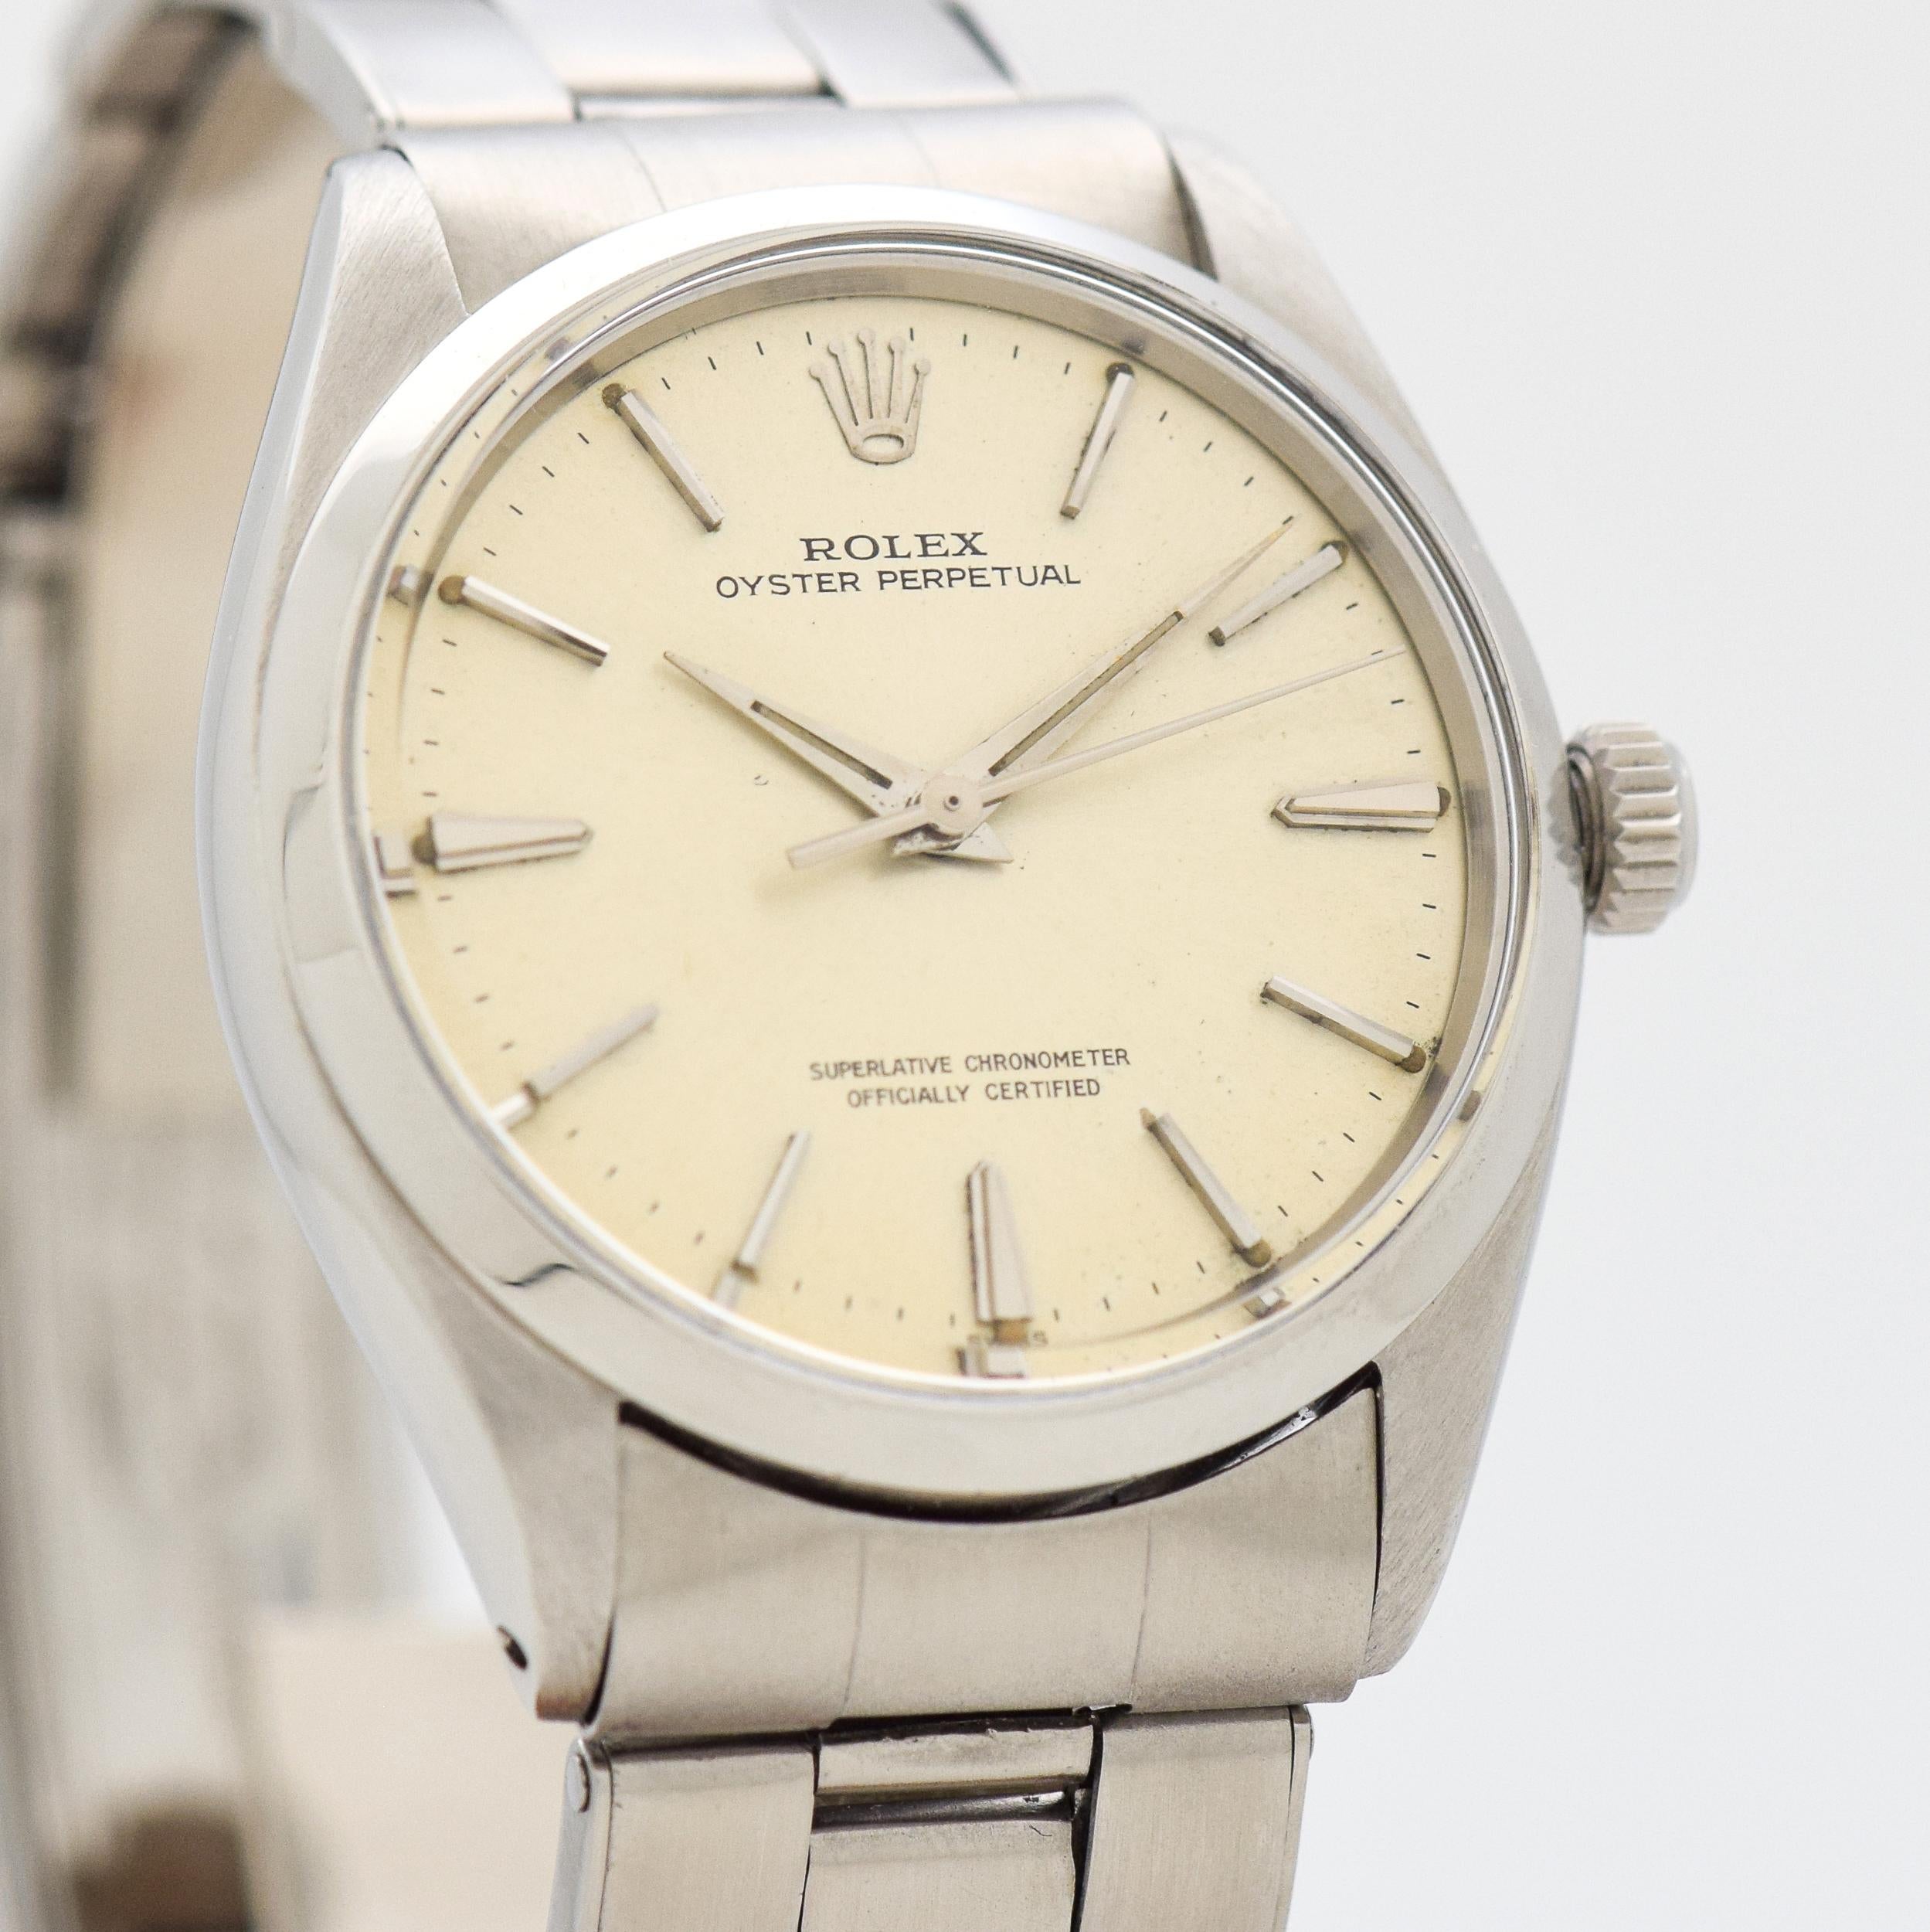 1963 Vintage Rolex Oyster Perpetual Ref. 1002 Stainless Steel watch with Original Silver Dial with Attached Steel Beveled Stick/Bar/Baton Markers with Original Rolex Stainless Steel Oyster Bracelet. 34mm x 38mm lug to lug (1.34 in. x 1.5 in.) - 26